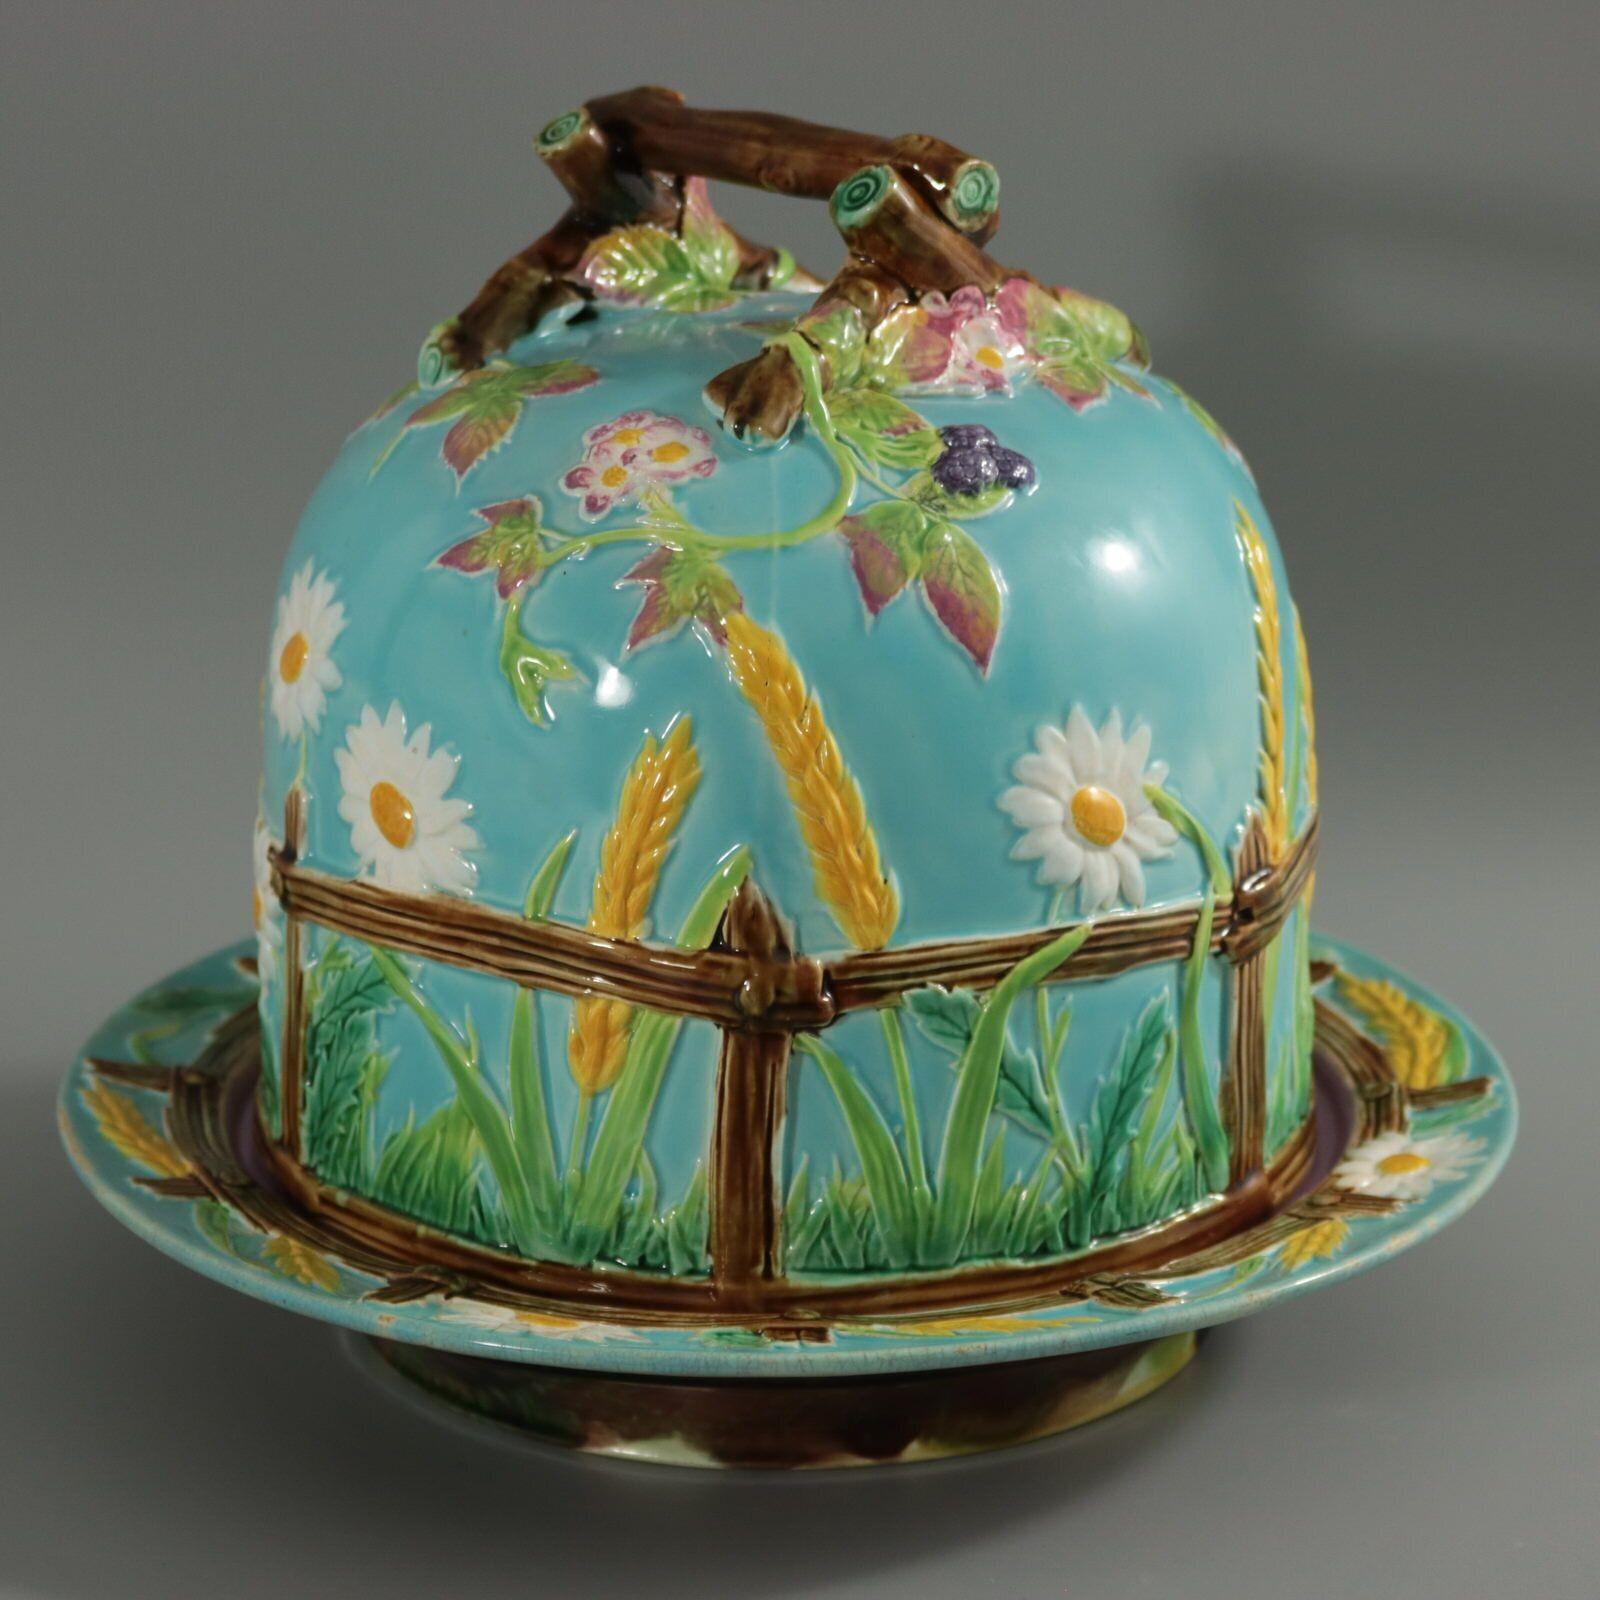 George Jones & Sons Majolica cheese keep which features a picket fence, daisies, corn, brambles and a twig handle. Colouration: turquoise, green, ochre, are predominant. The piece bears maker's marks for the George Jones & Sons pottery. Book